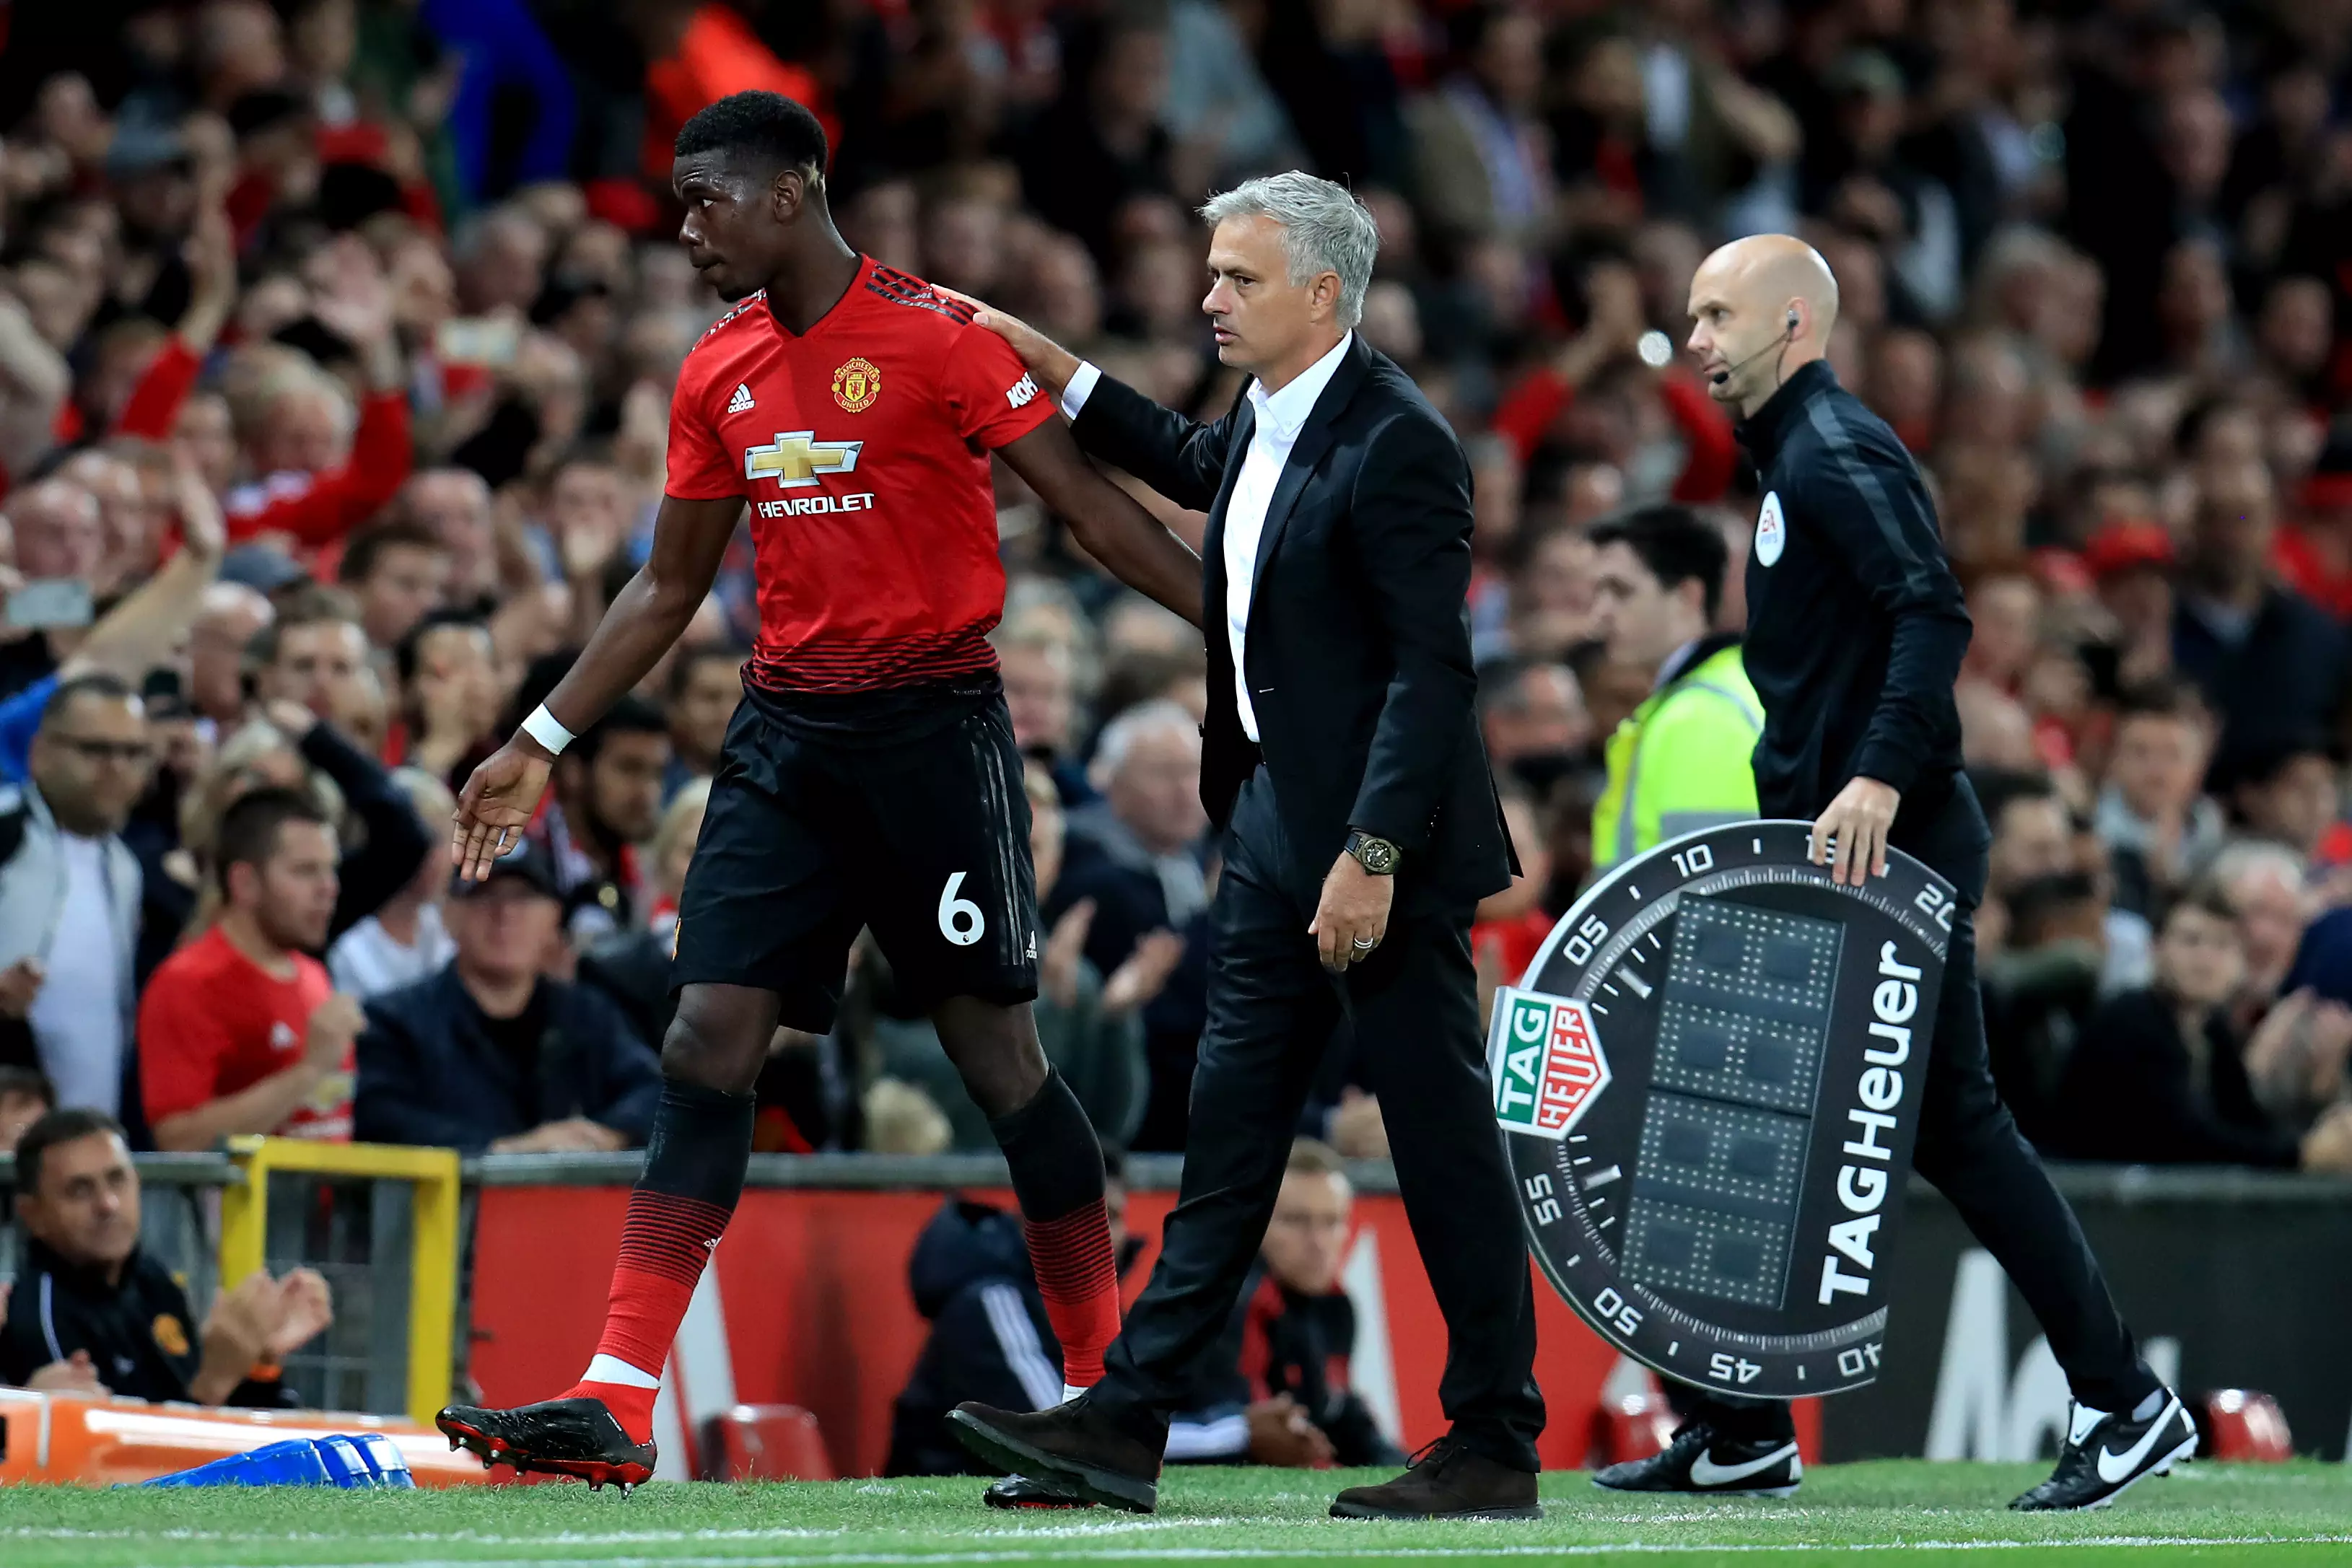 Mourinho gave Pogba the captain's armband at the beginning of the season. Image: PA Images